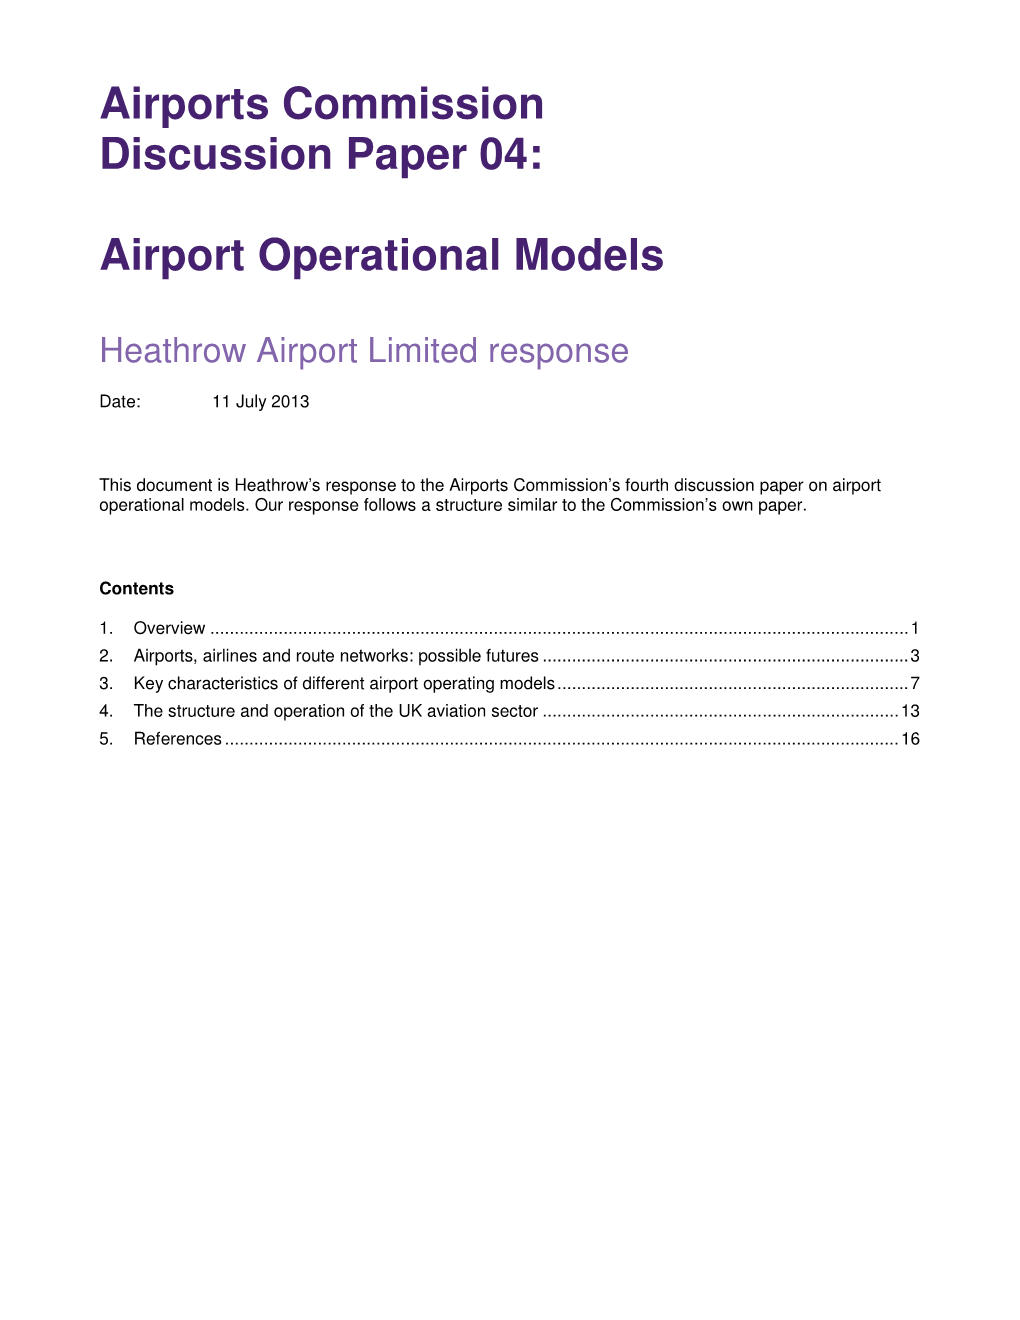 Airports Commission Discussion Paper 04: Airport Operational Models